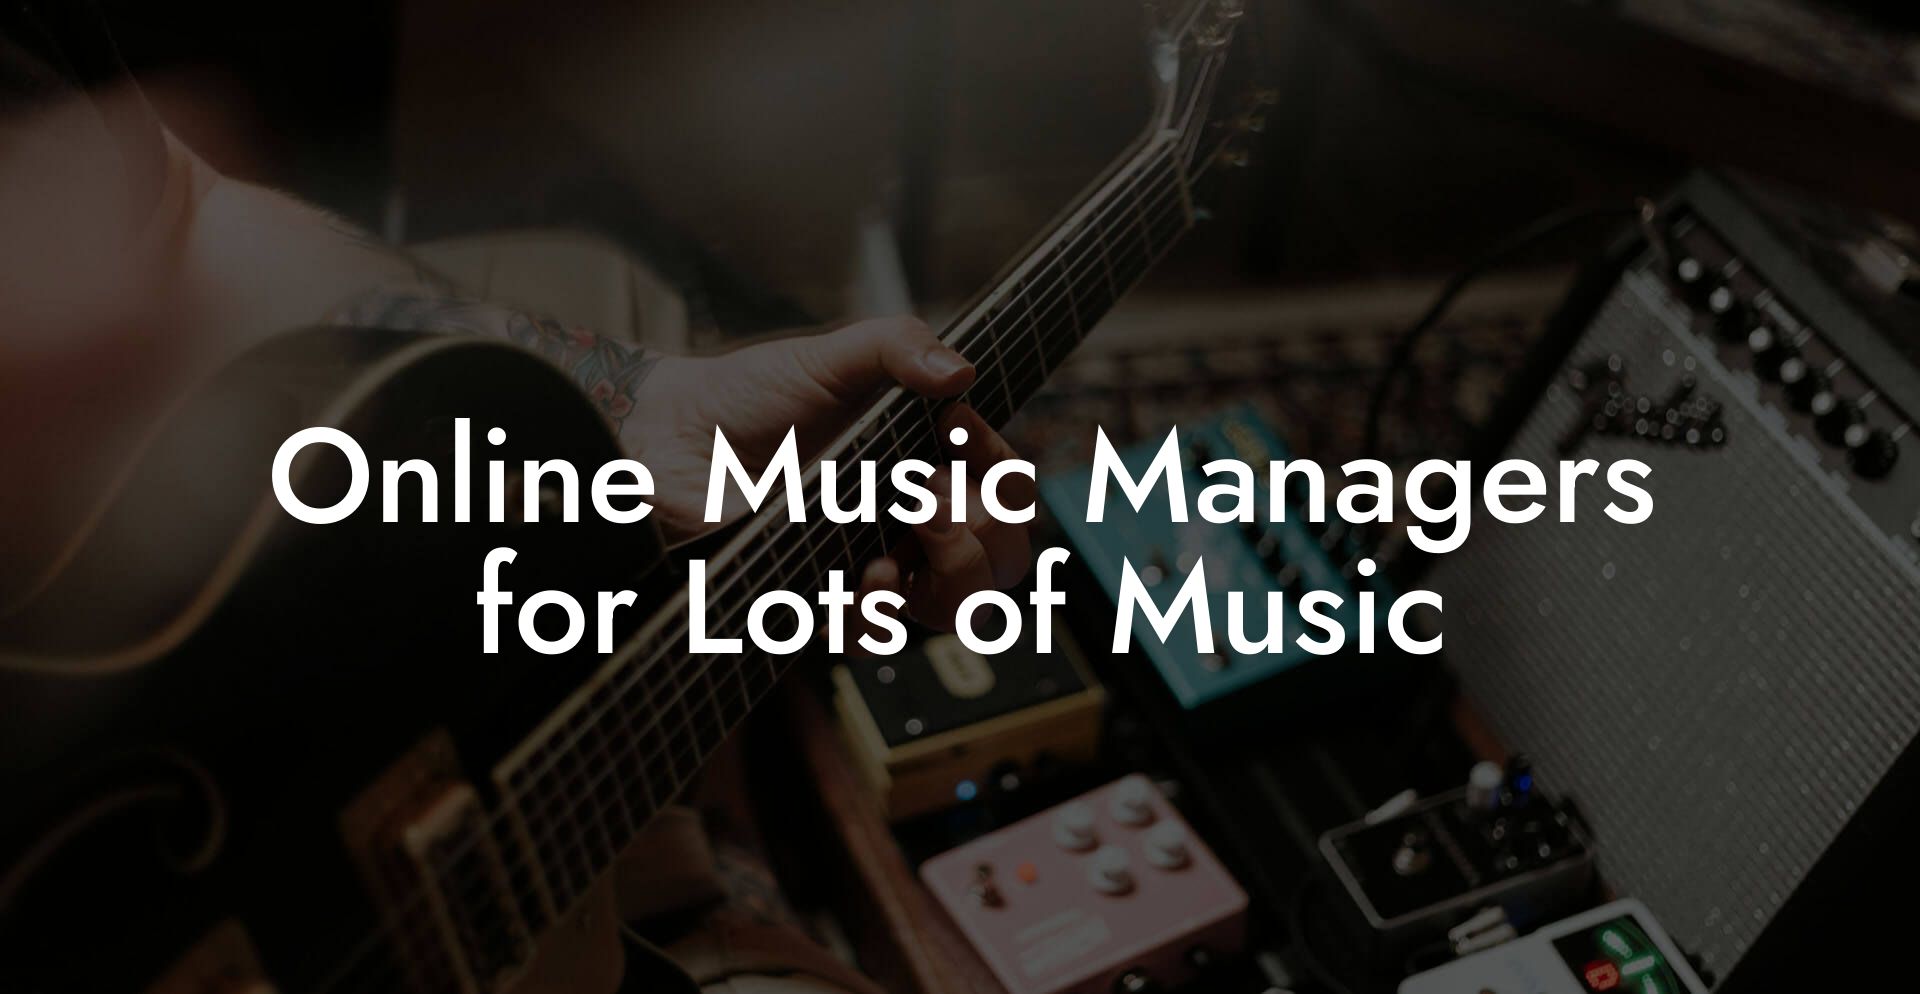 Online Music Managers for Lots of Music